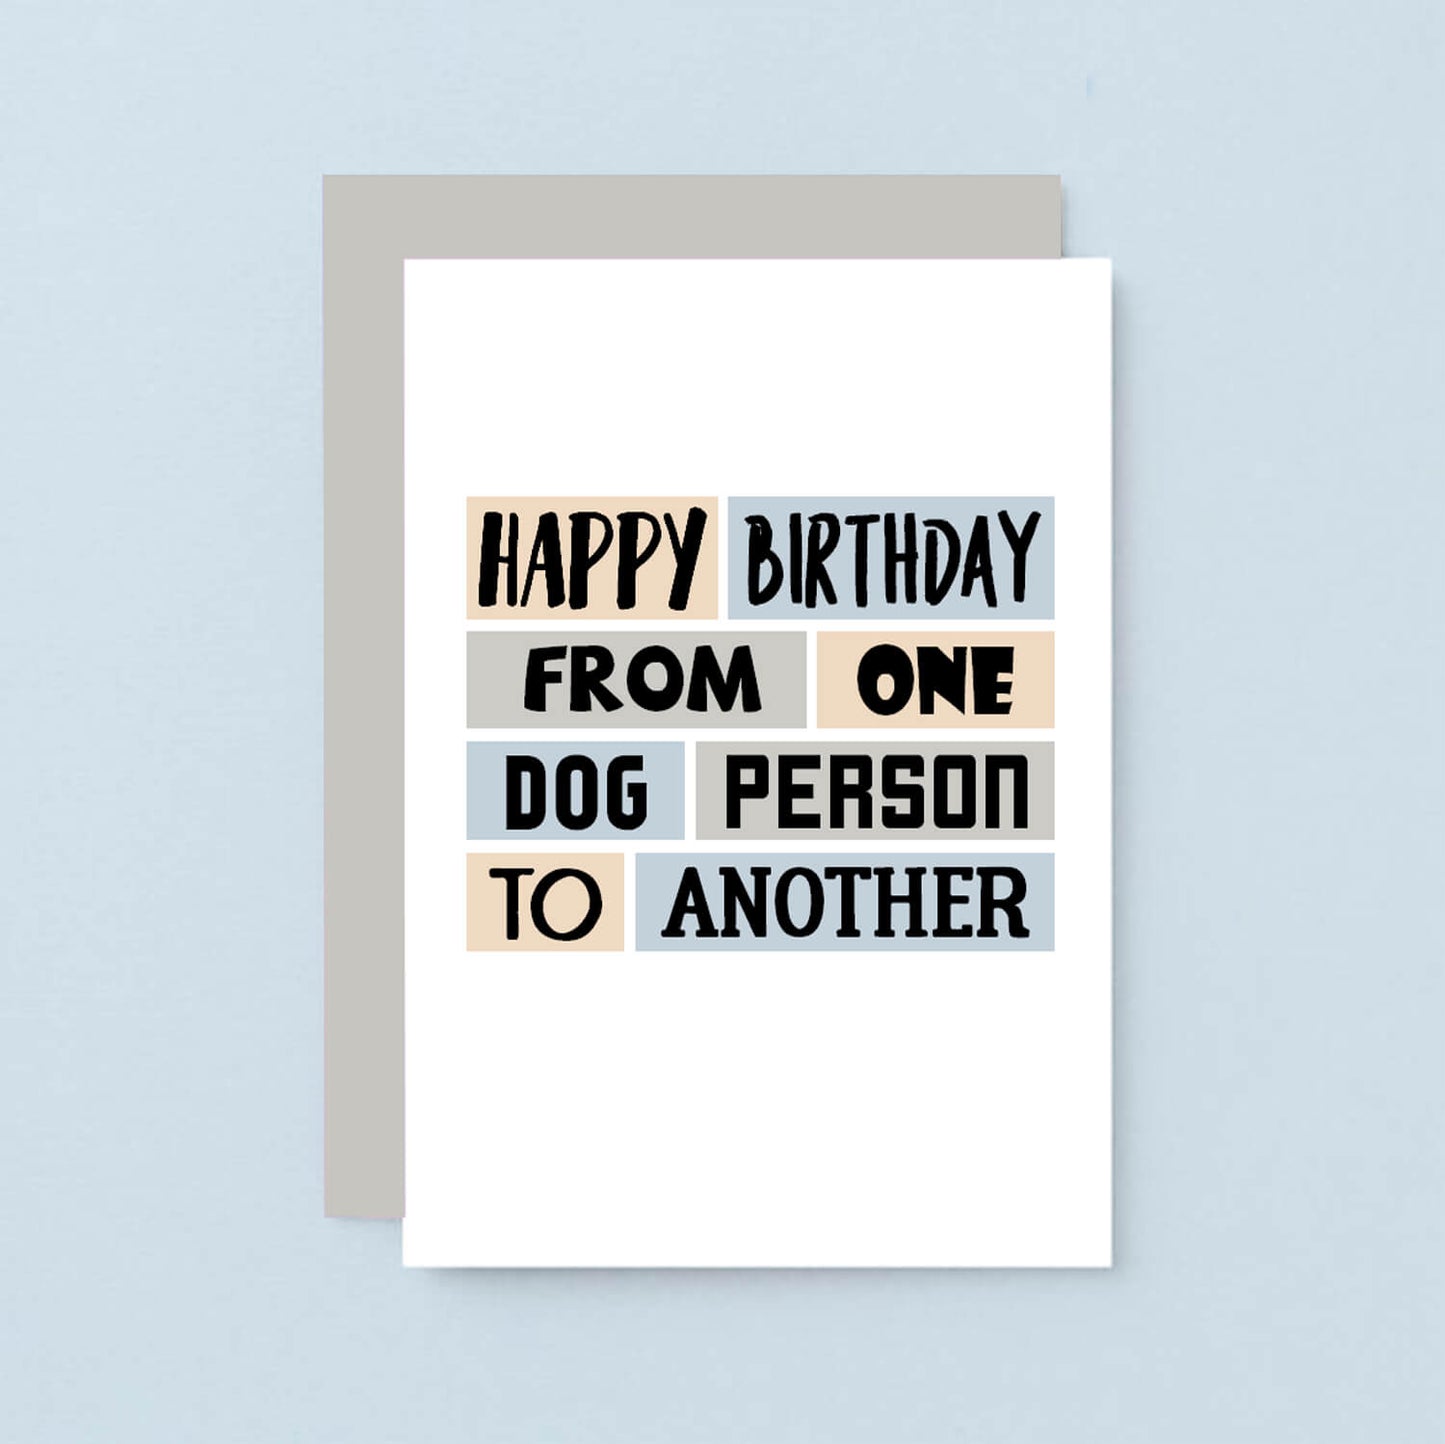 Dog Birthday Card by SixElevenCreations. Reads Happy birthday from one dog person to another. Product Code SE0279A6